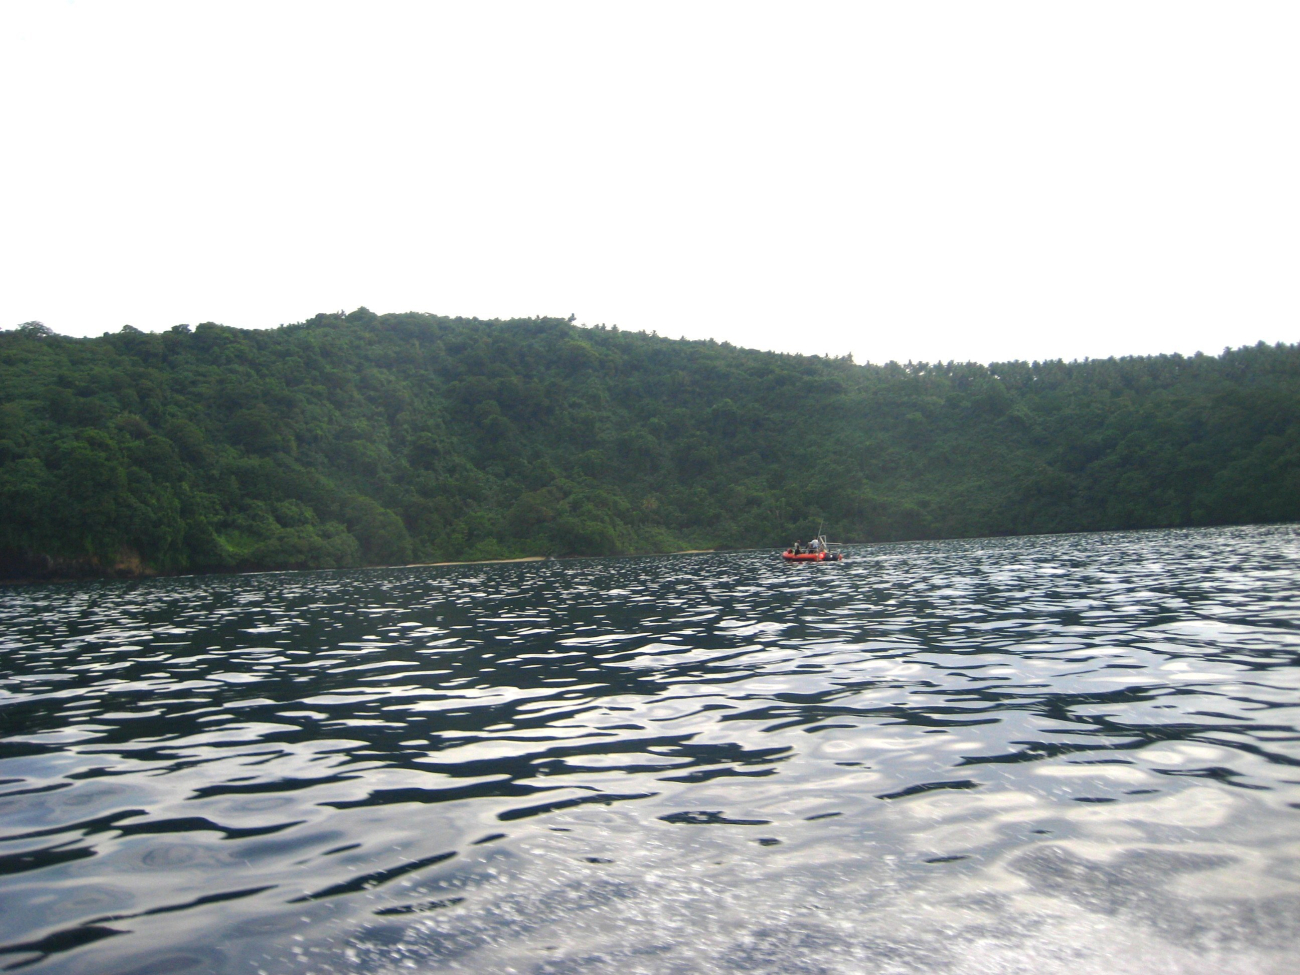 Scientists conducting studies from a RHIB in the vicinity of Fagatele Bay